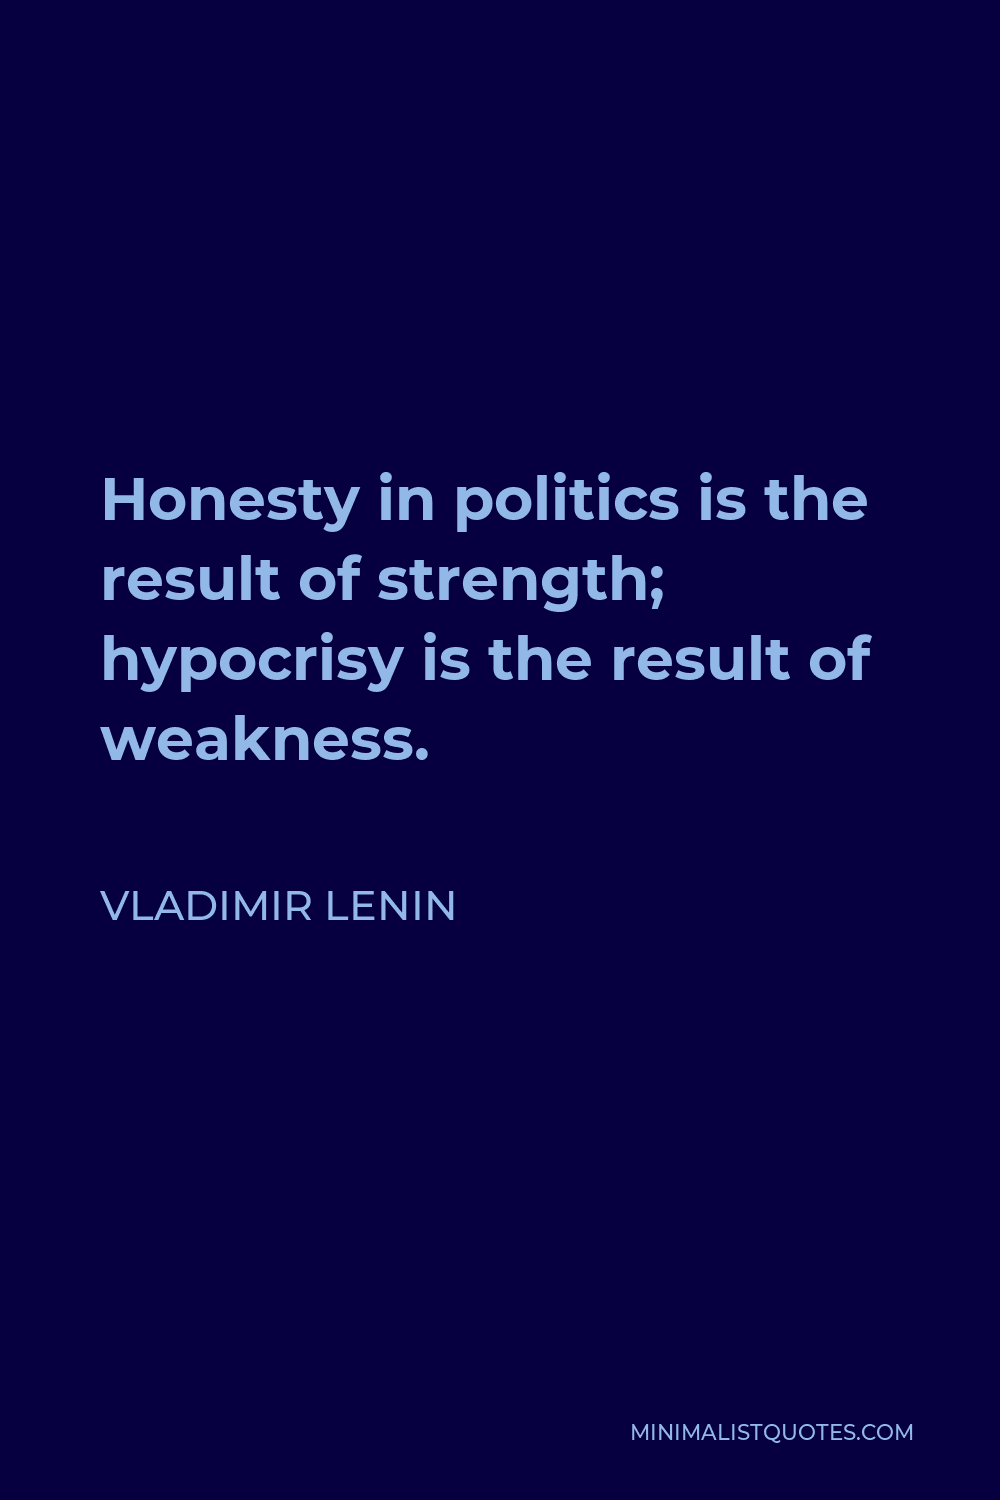 Vladimir Lenin Quote - Honesty in politics is the result of strength; hypocrisy is the result of weakness.